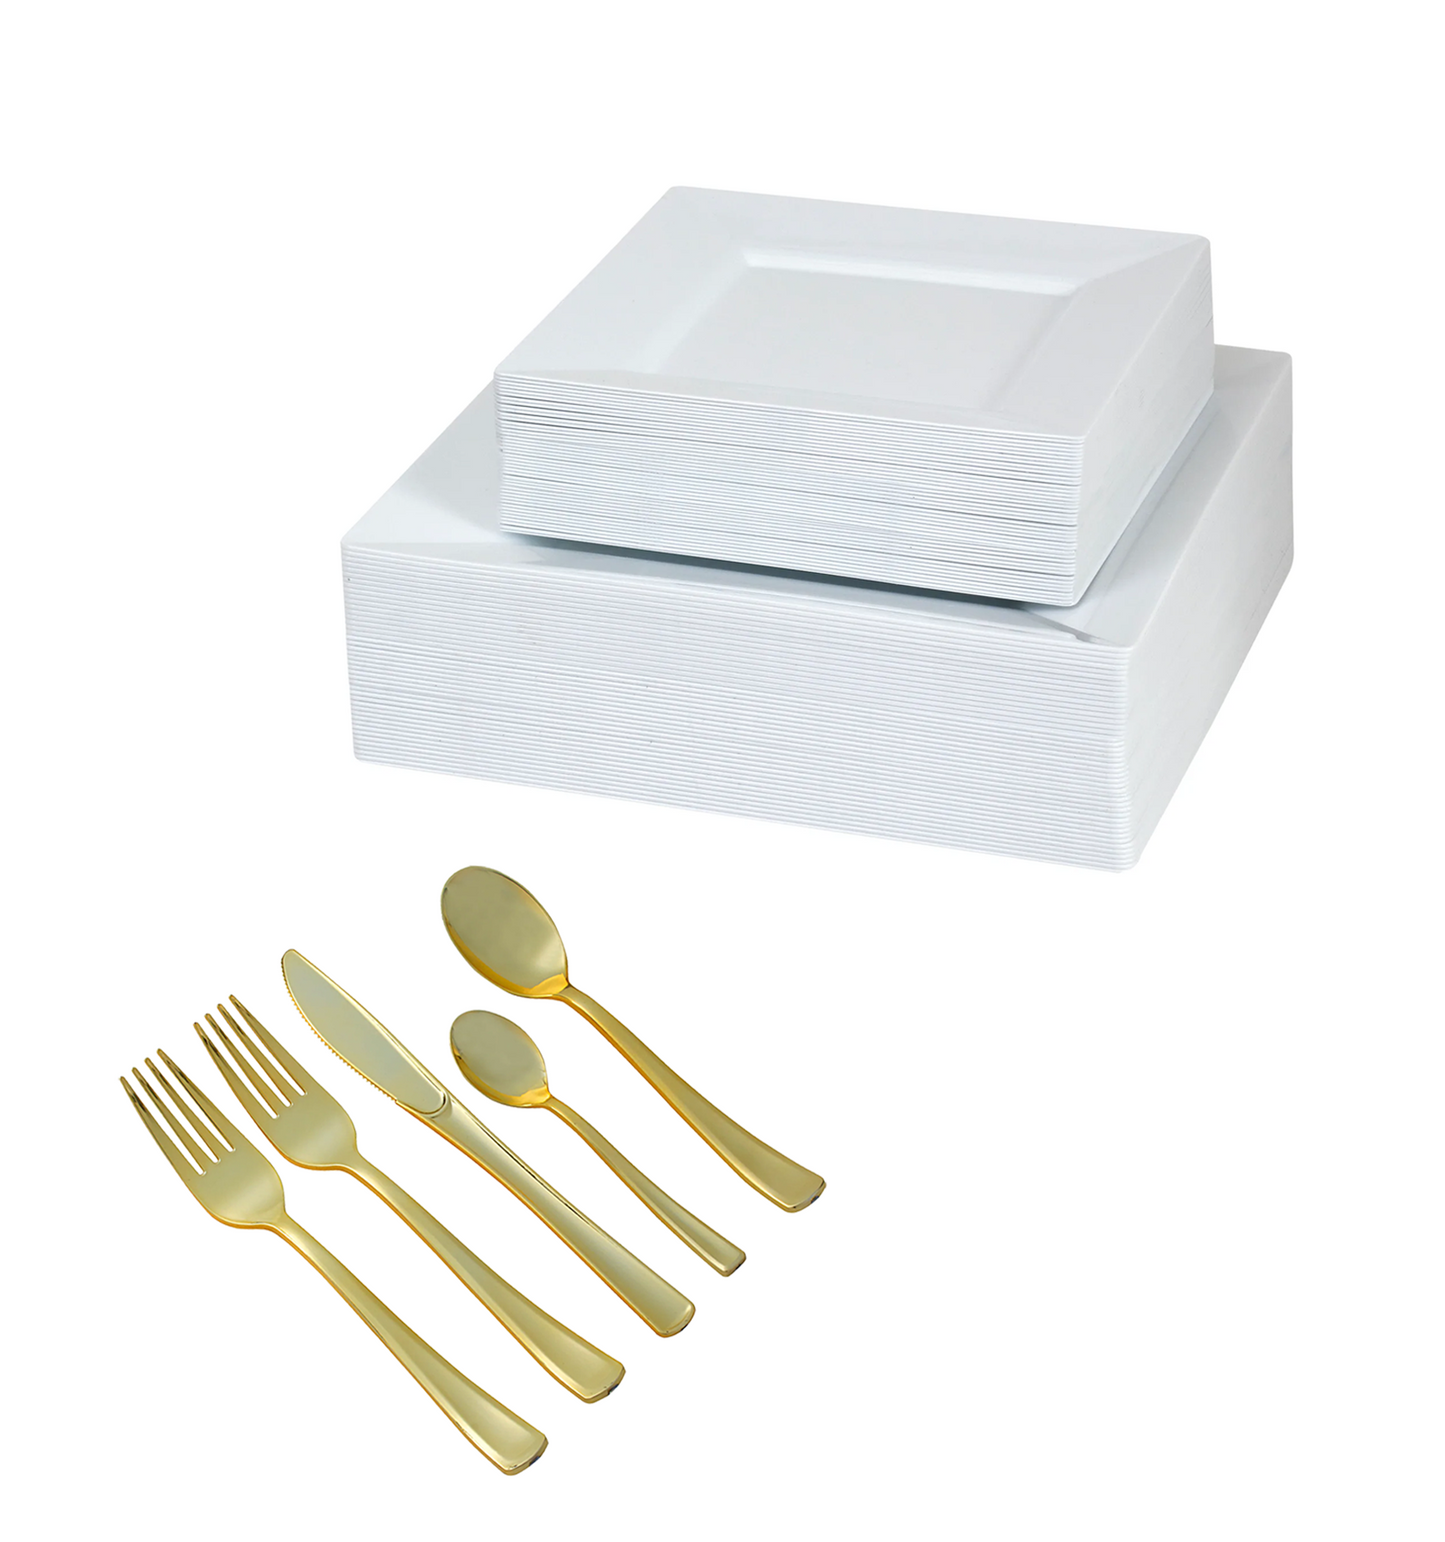 330-piece white square dinnerware set for 40 guests: 80 white square plastic plates, 250 plastic gold silverware utensils